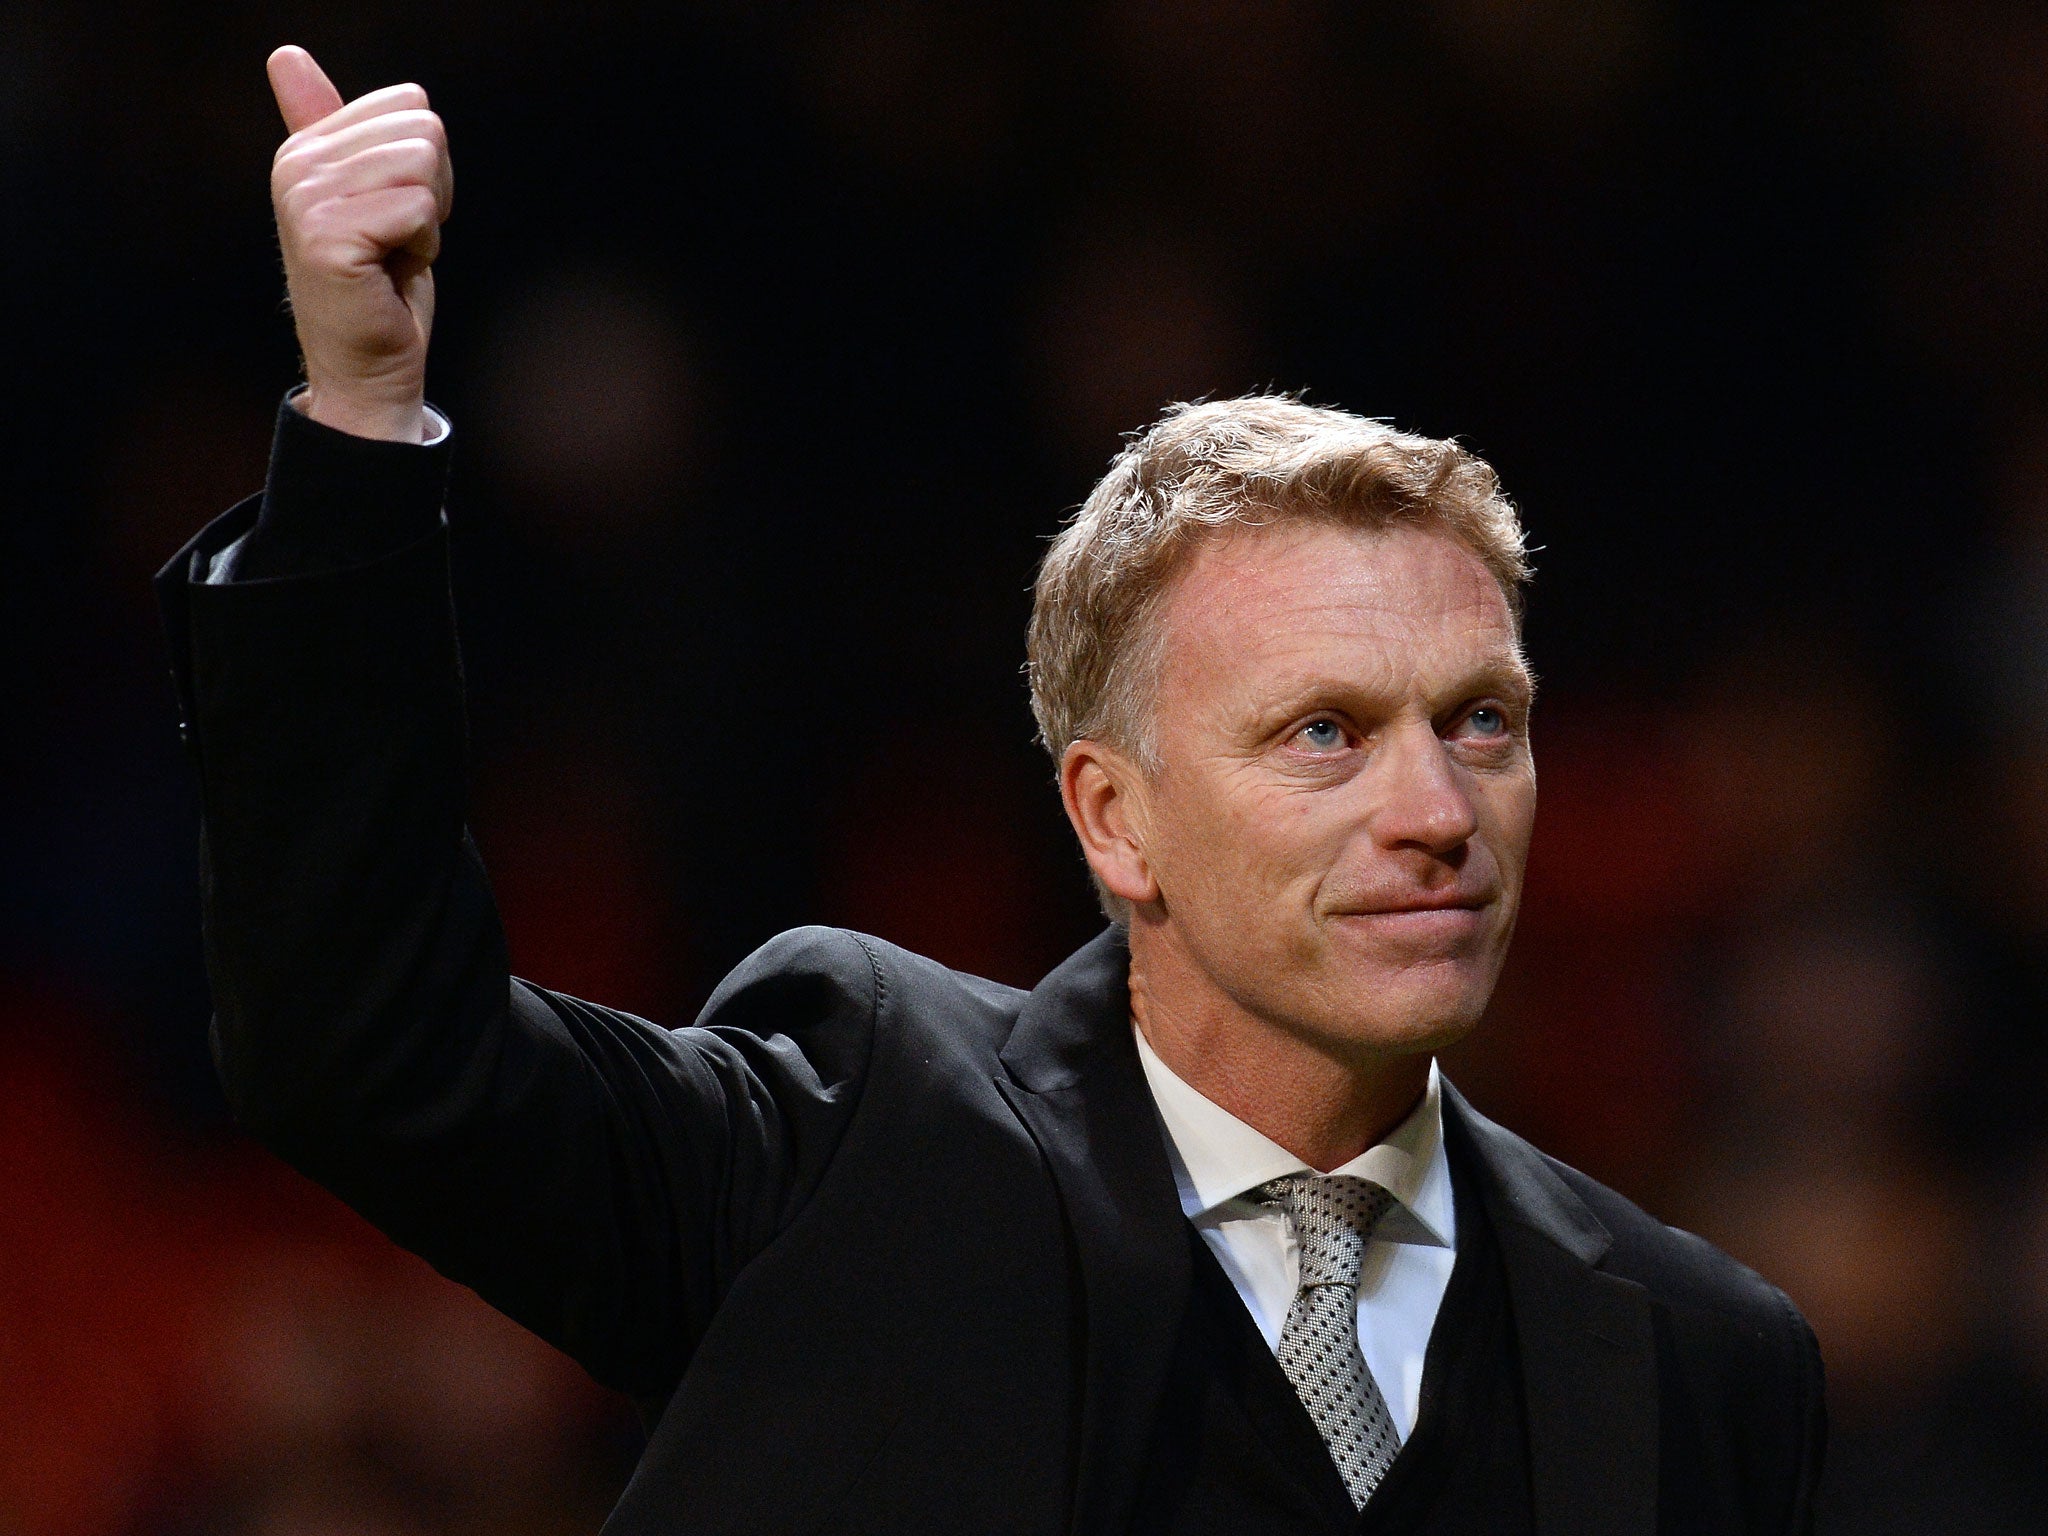 Manchester United manager David Moyes salutes the home fans after their Champions League victory over Shakhtar Donetsk